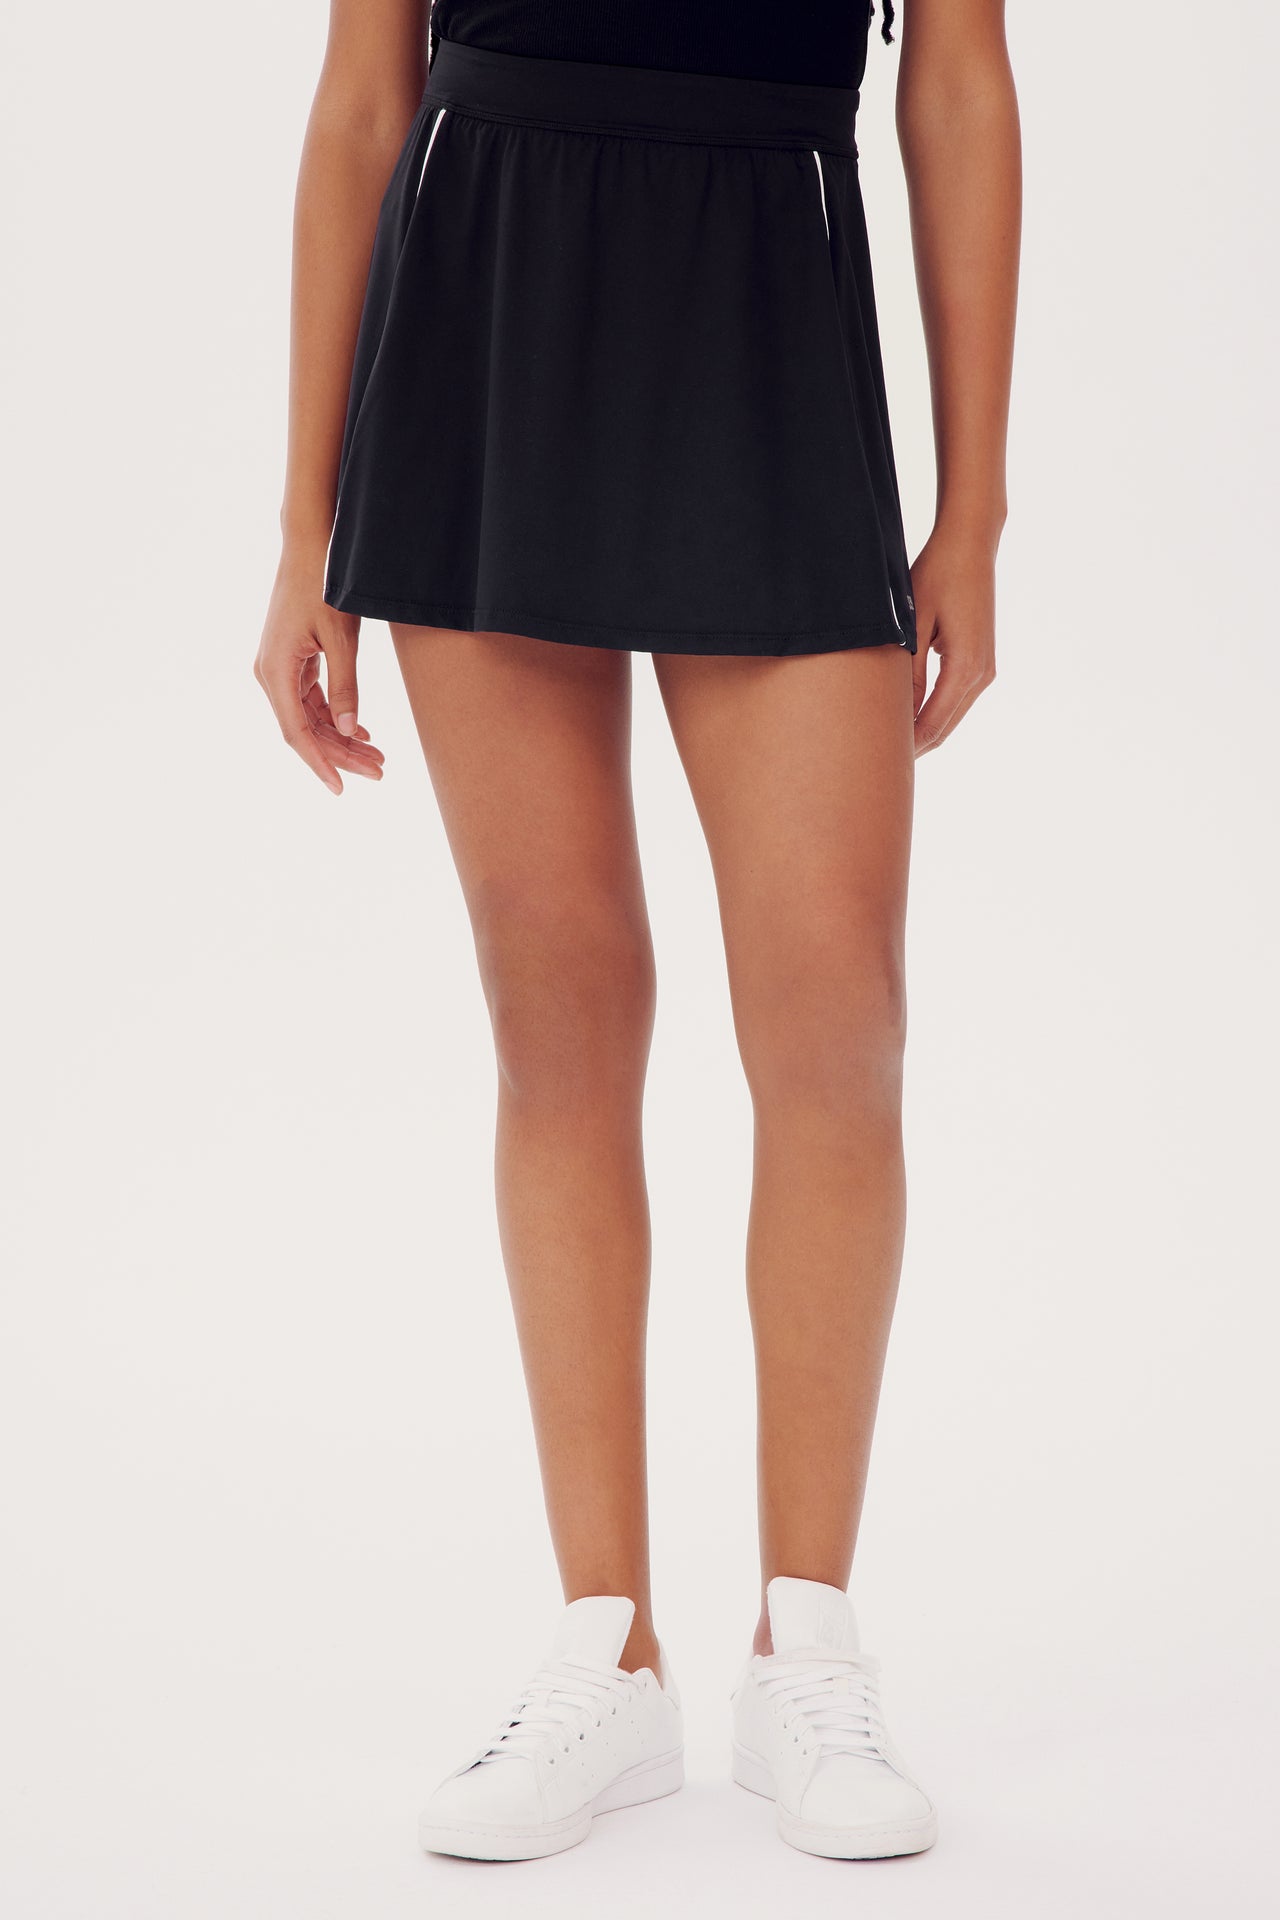 A person wearing a SPLITS59 Venus High Waist Rigor Skort w/Piping in Black and white sneakers stands with hands on hips, cropped at the waist.